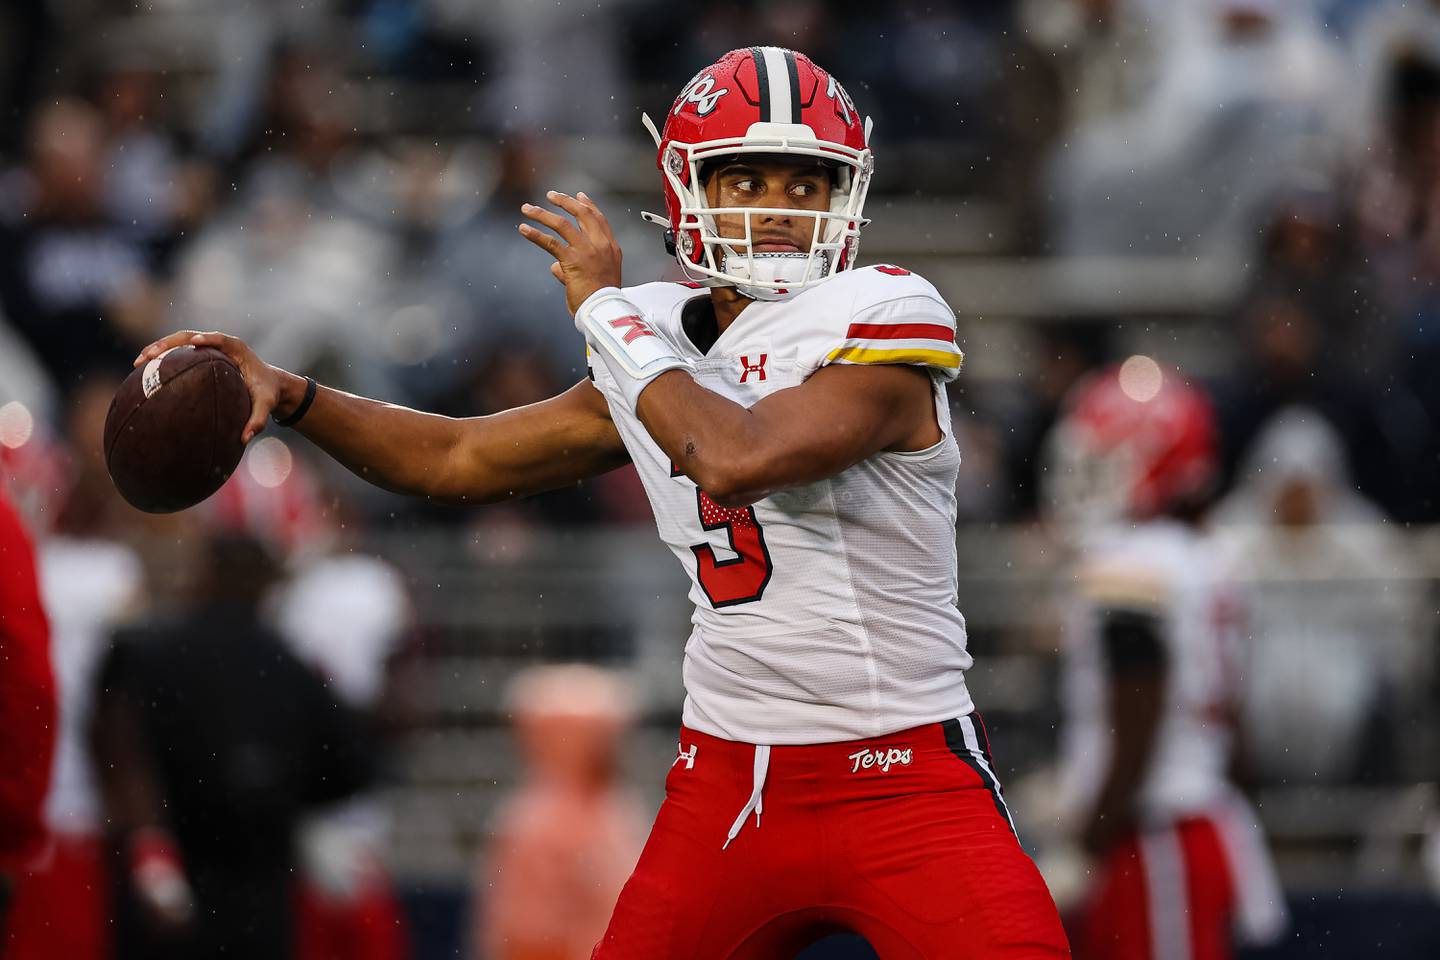 STATE COLLEGE, PA - NOVEMBER 12: Taulia Tagovailoa #3 of the Maryland Terrapins warms up before the game against the Penn State Nittany Lions at Beaver Stadium on November 12, 2022 in State College, Pennsylvania.